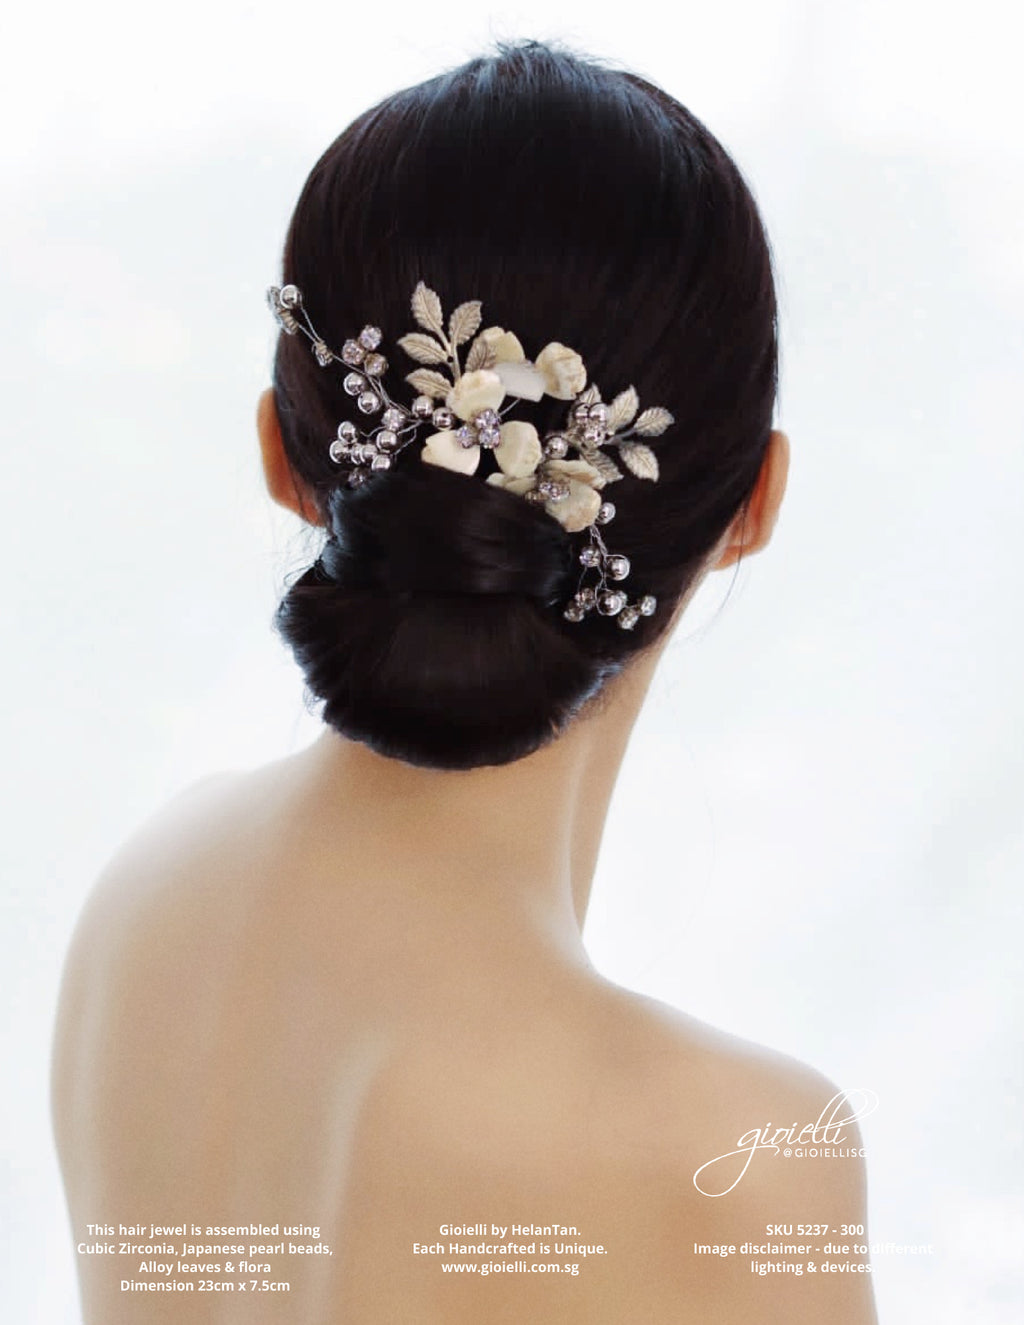 Gioielli Wedding Bridal Hair Accessories - Cubic Zirconia, Japanese Pearl Beads, Alloy leaves & flora Hair Piece - Designed and handmade by Helan Tan